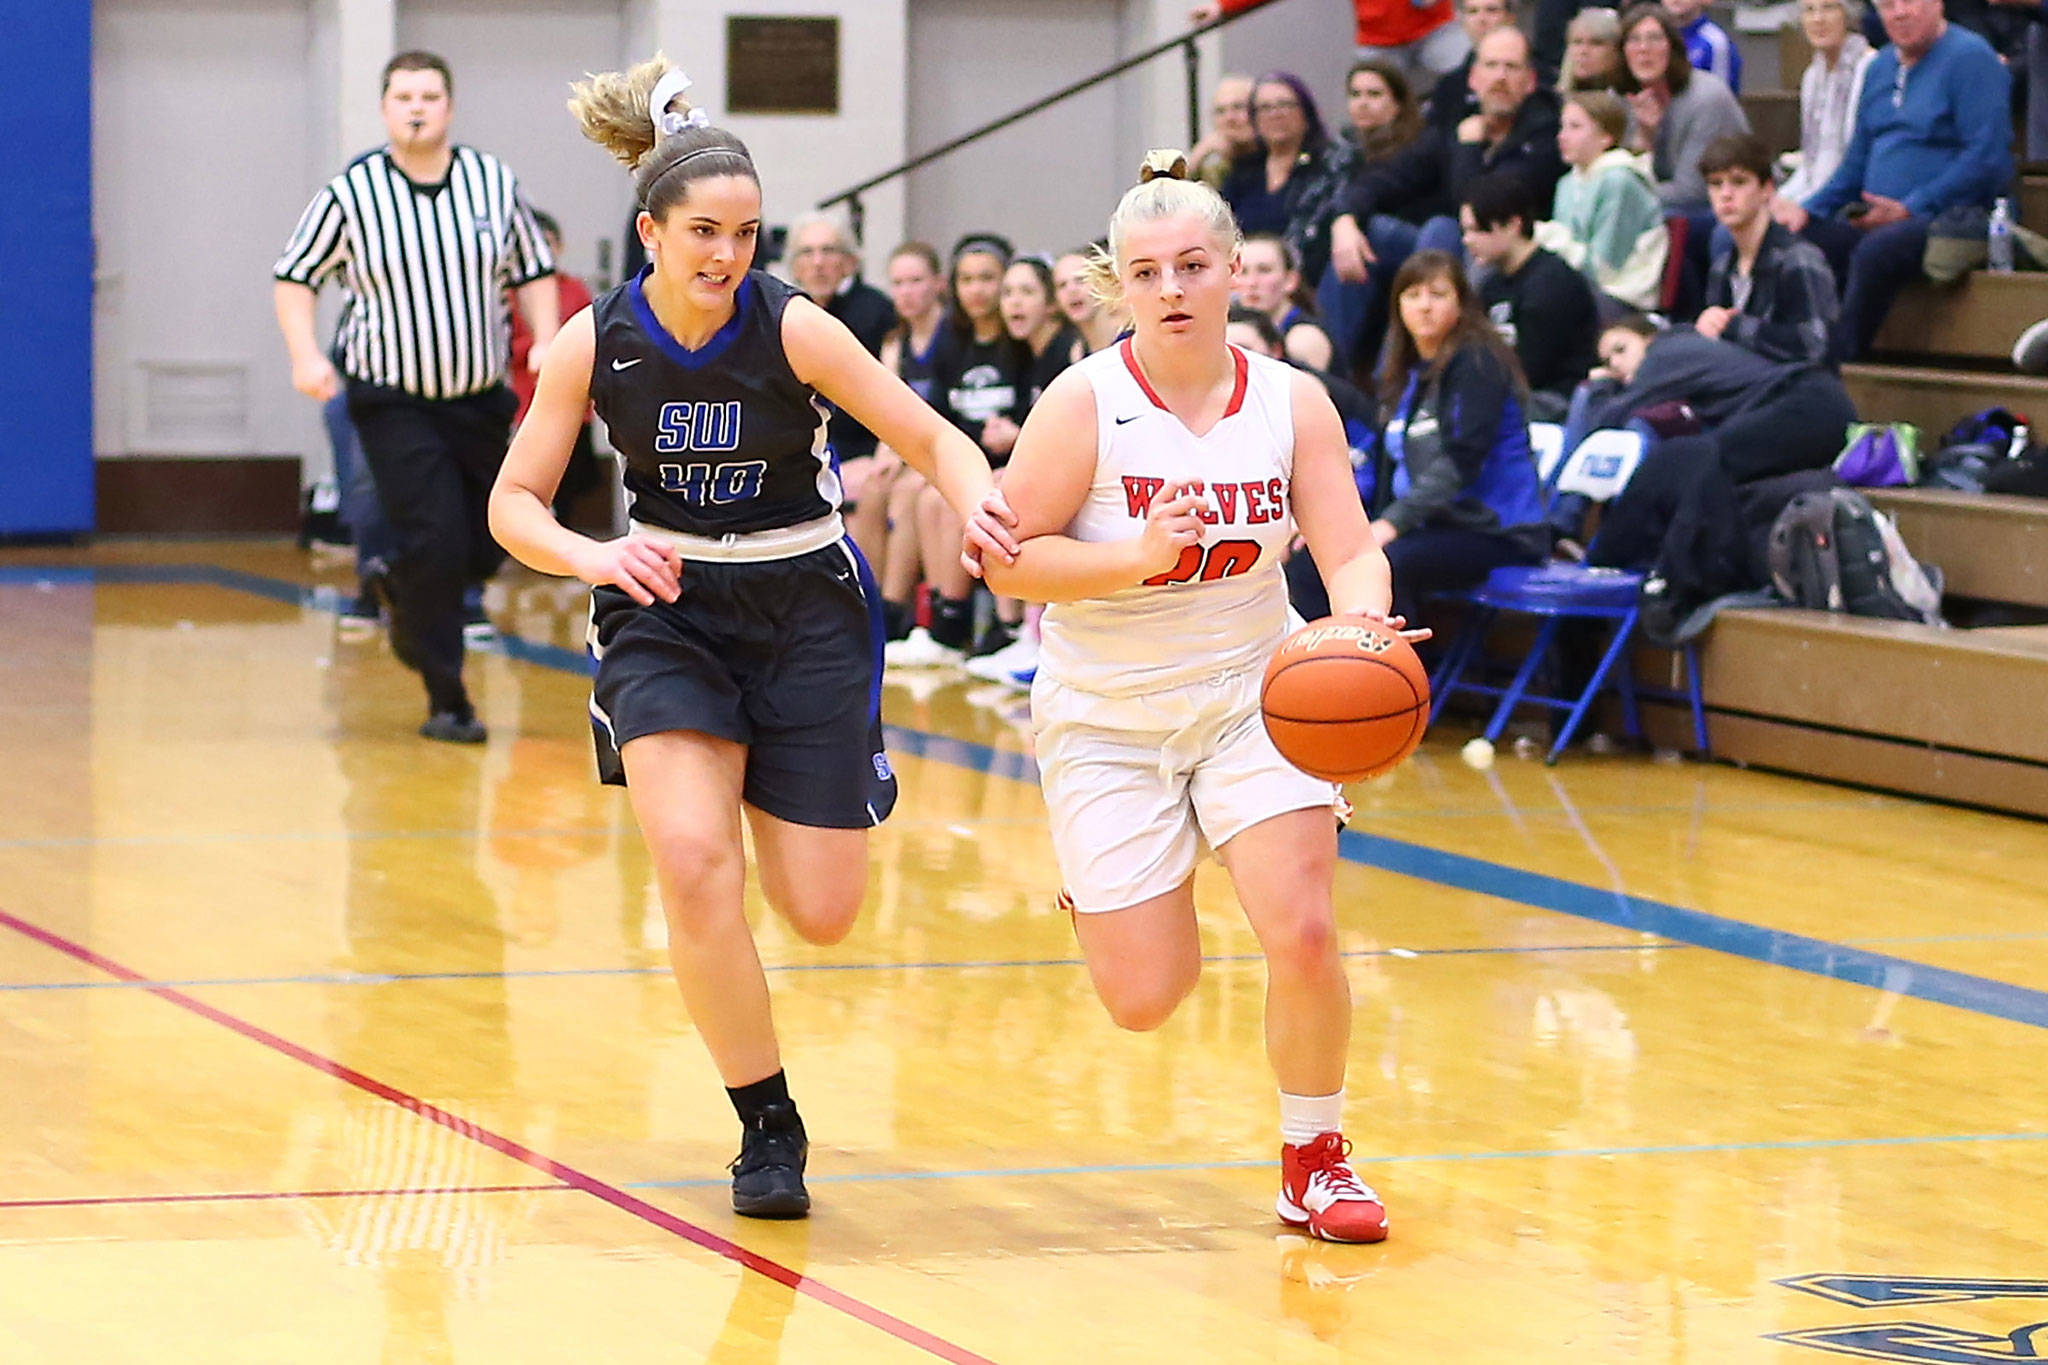 Coupeville’s Avalon Renninger, right, flies past South Whidbey’s Sami Daly in Friday’s game.(Photo by John Fisken)